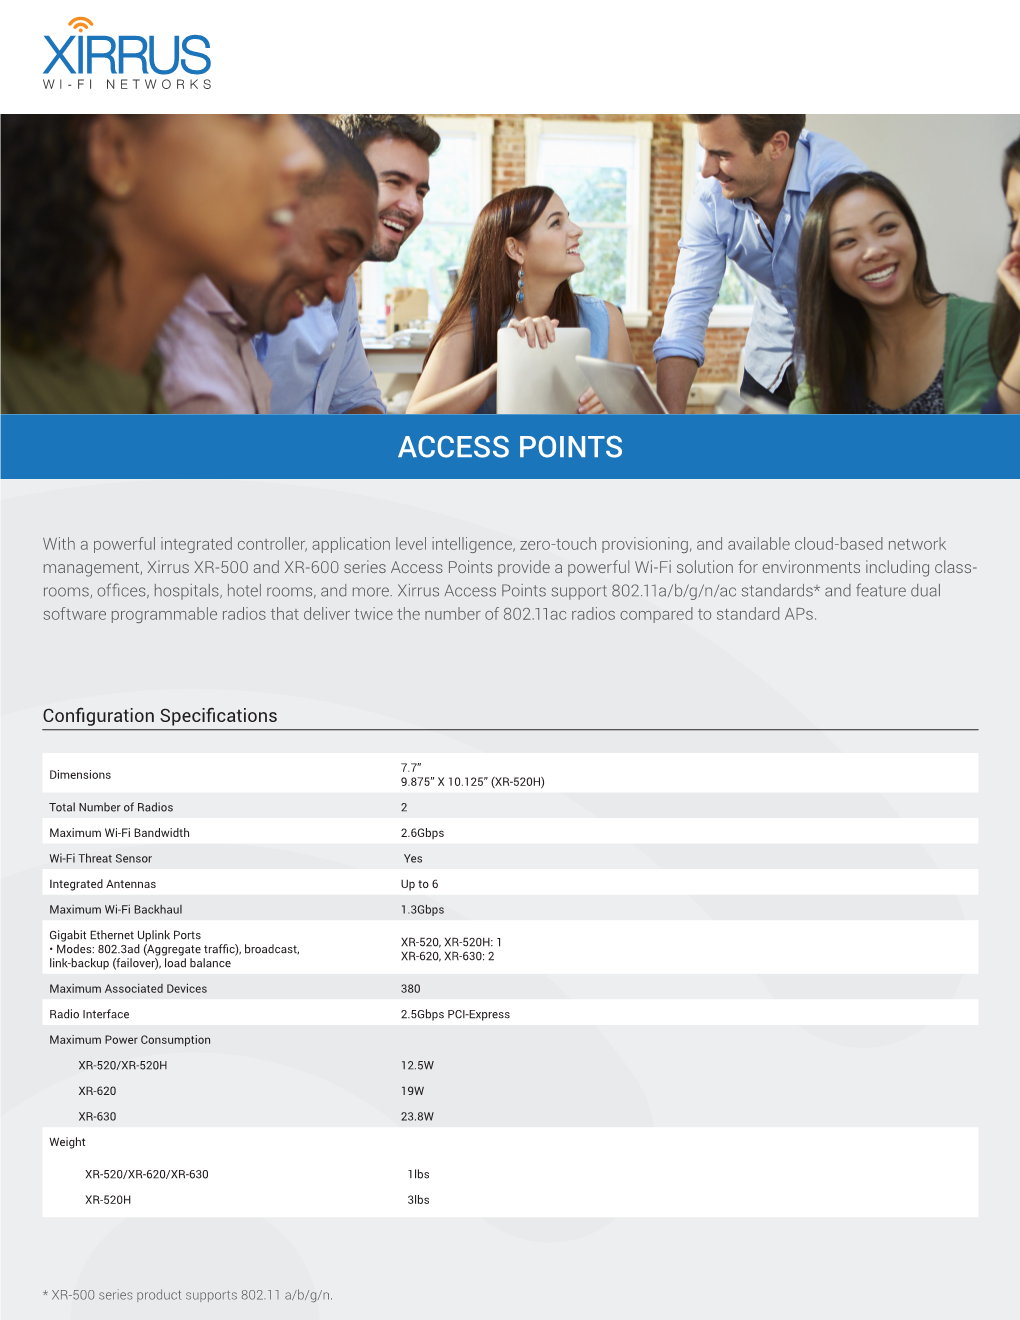 Access Points